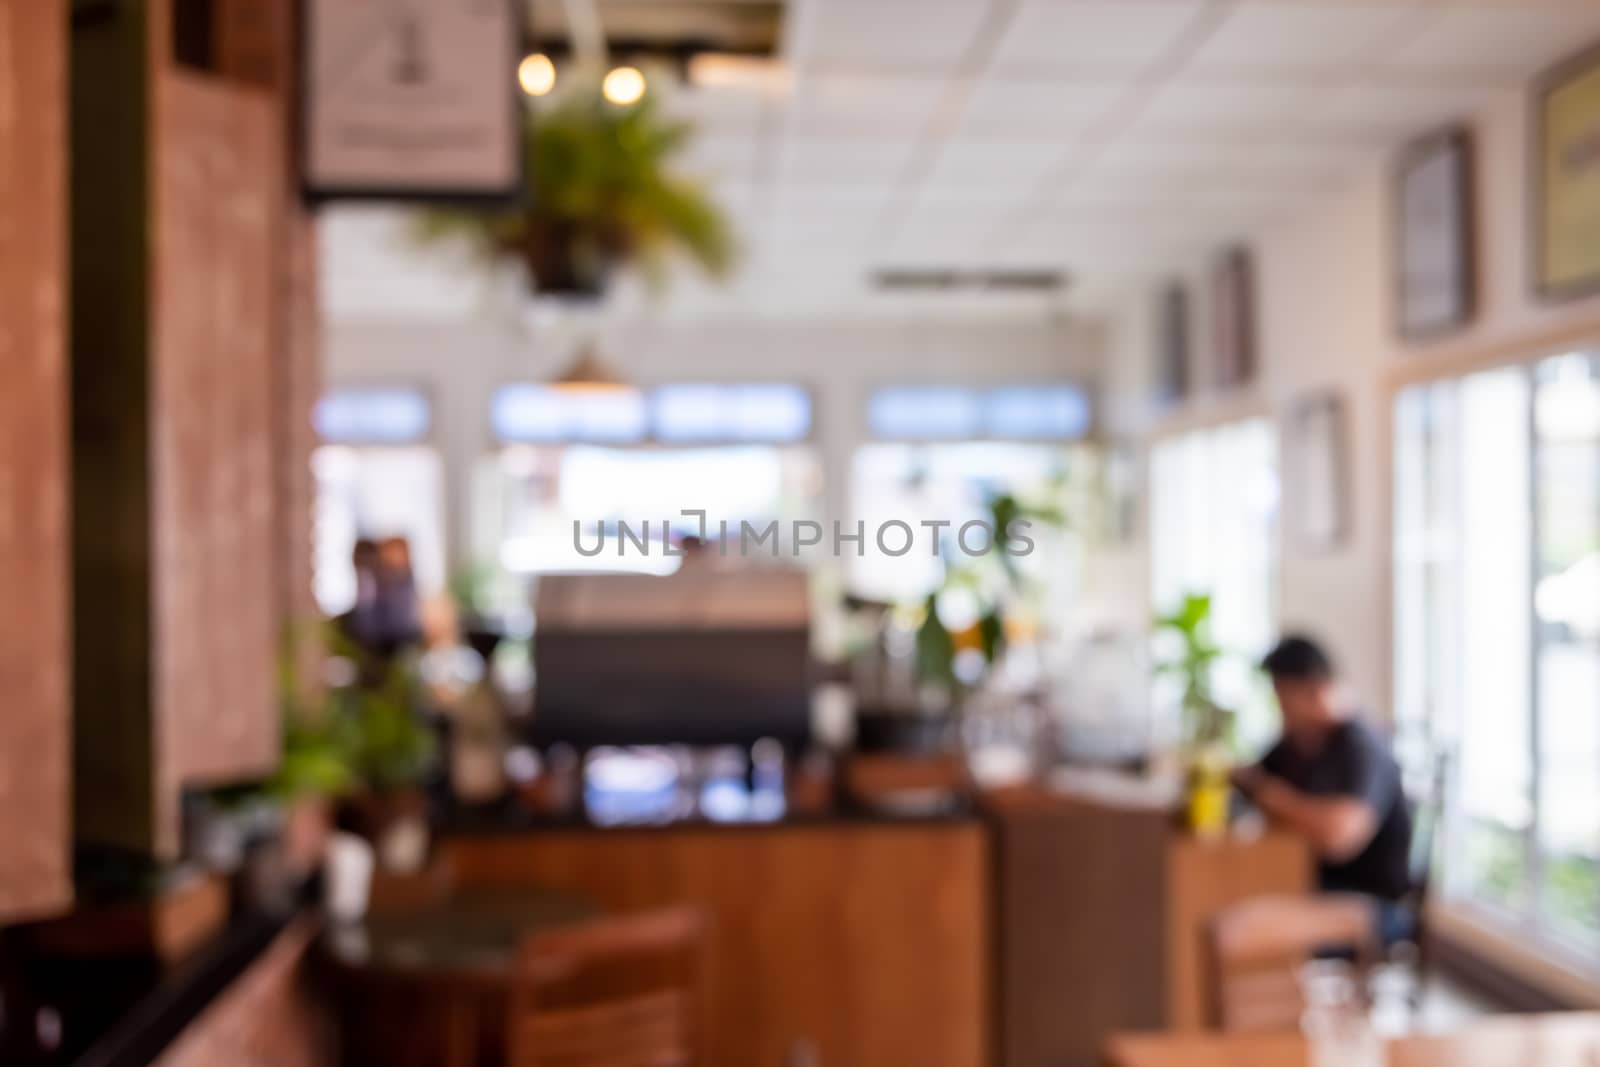 Blur coffee and restutant cafe with customers background. by Suwant